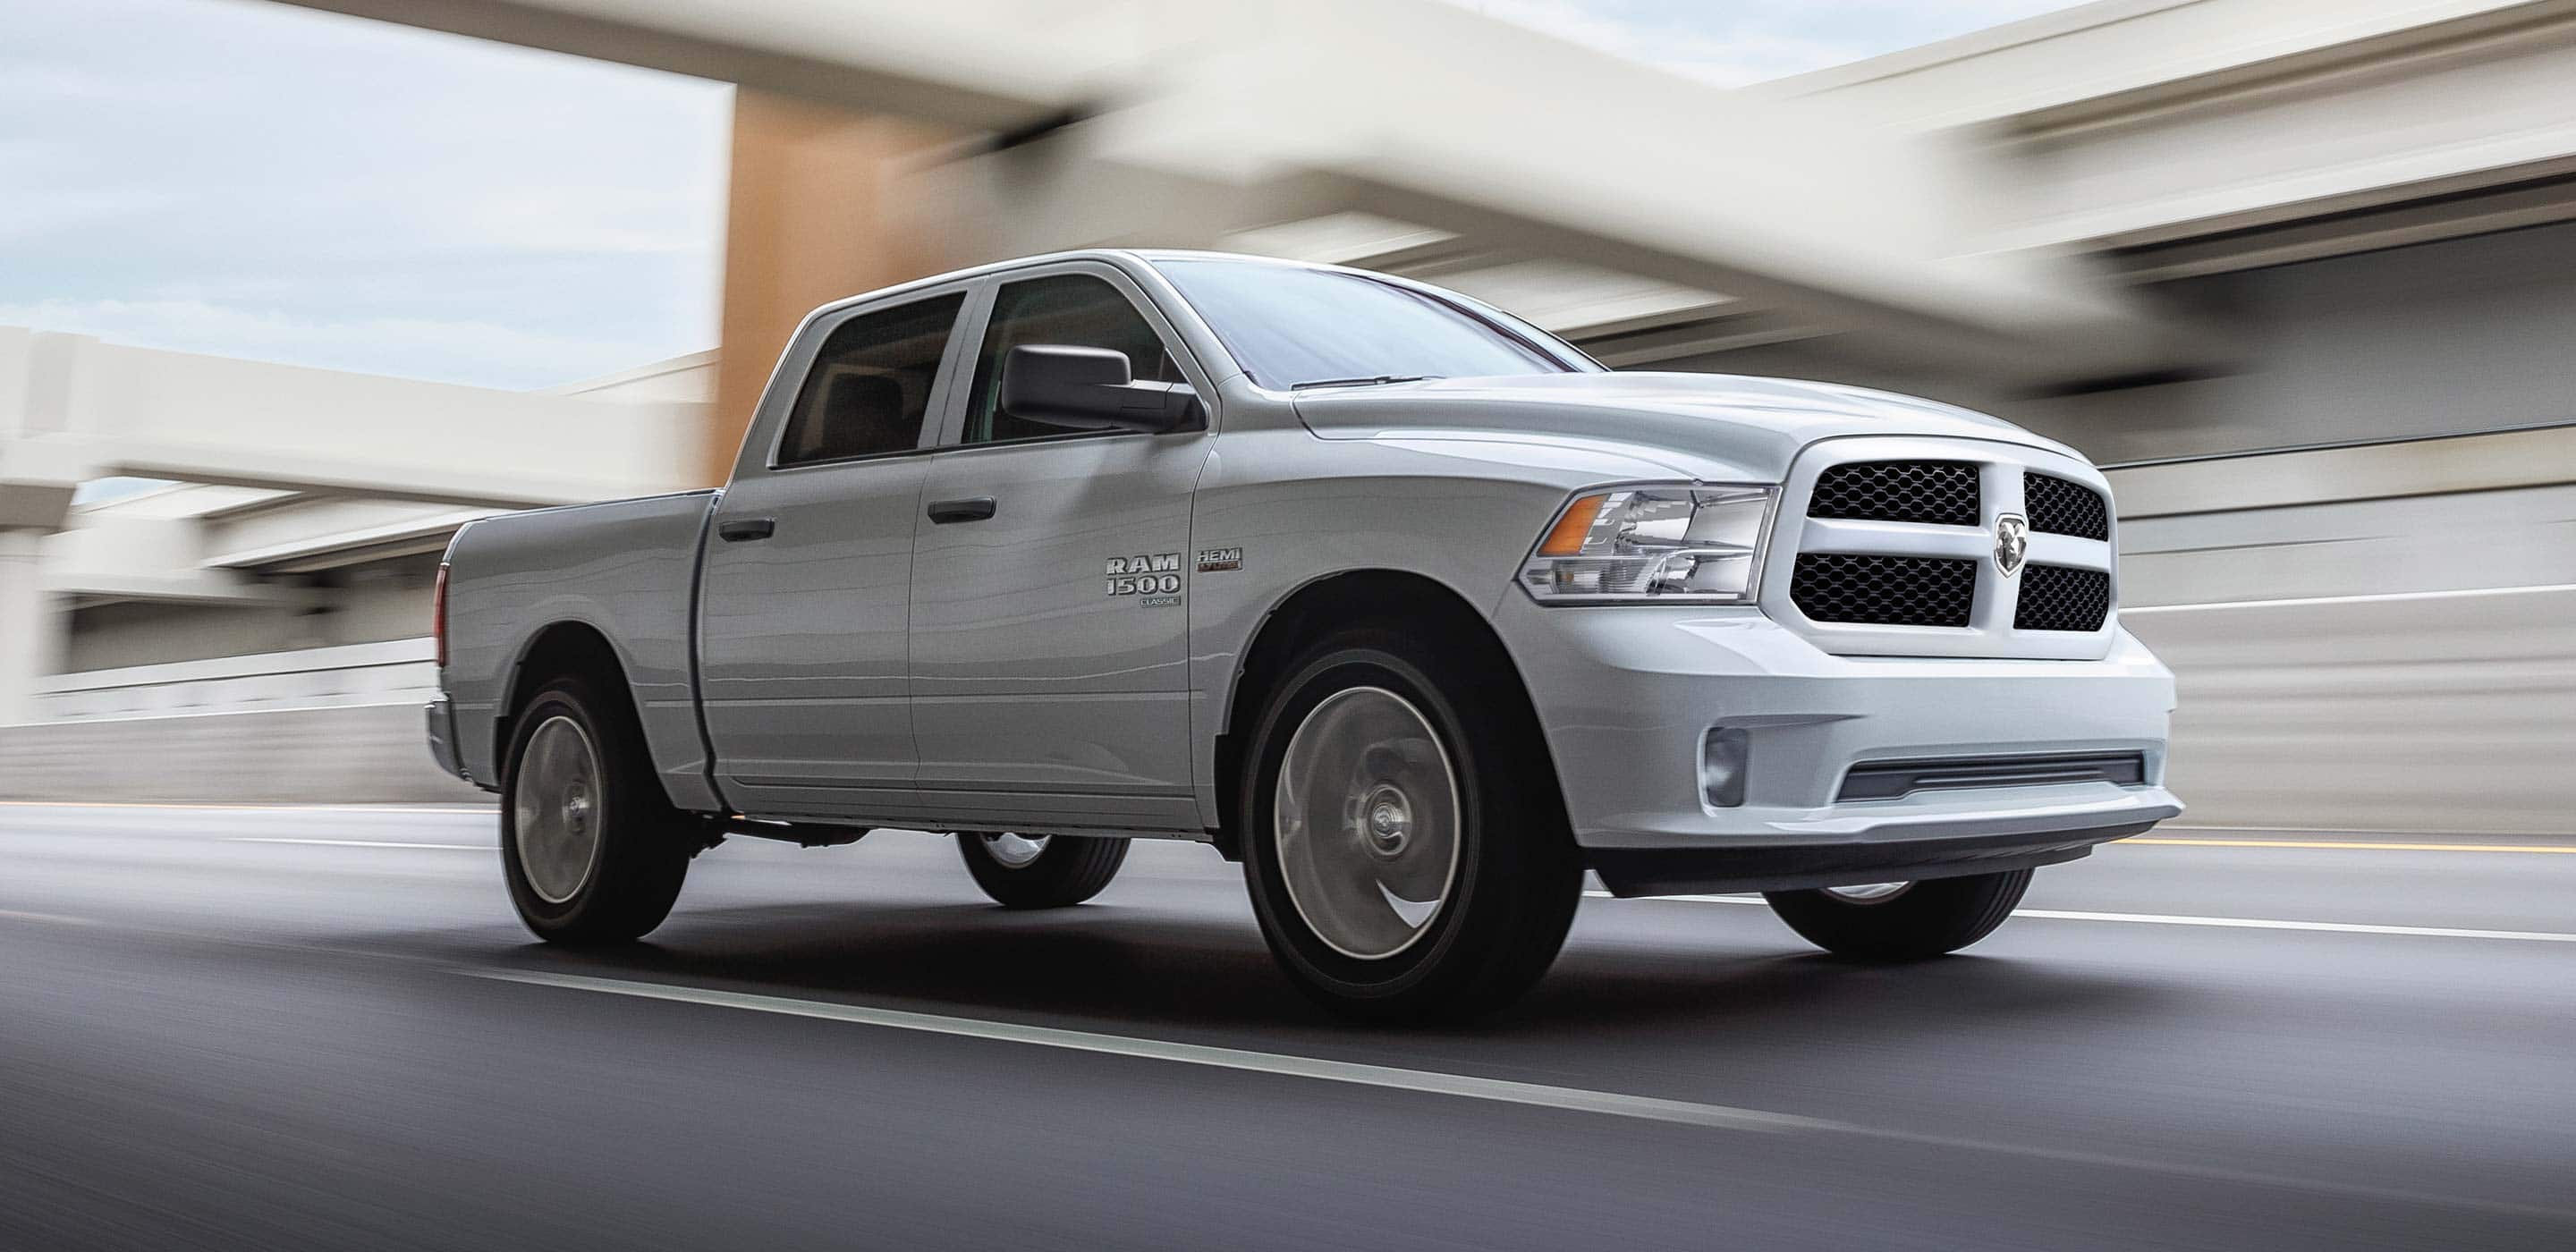 2022 Ram 1500 Classic Gallery | Pickup Truck Pictures